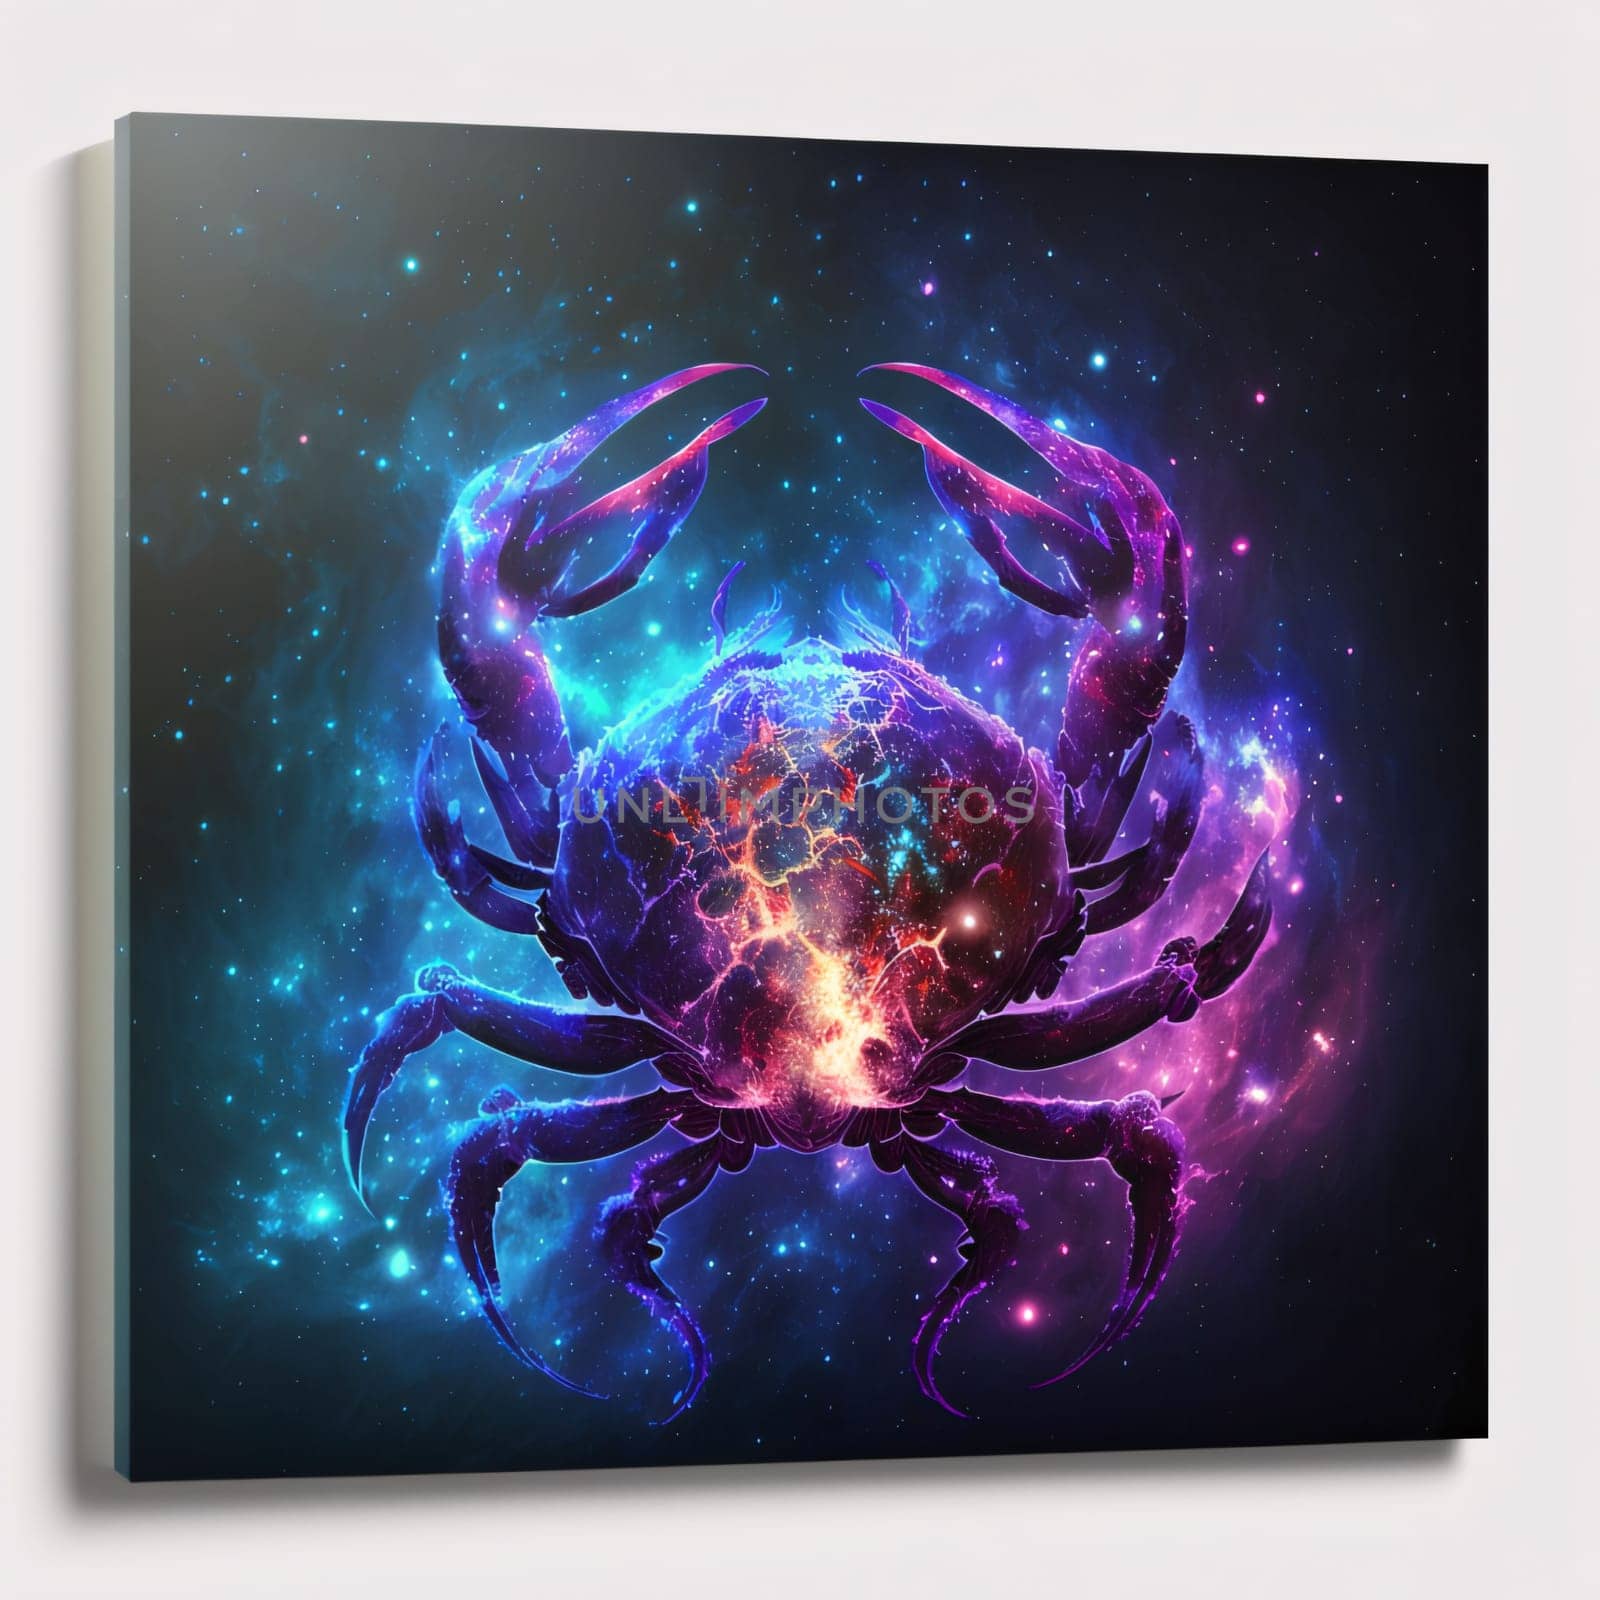 Signs of the zodiac: Vector illustration of a glowing blue crab on a dark space background.